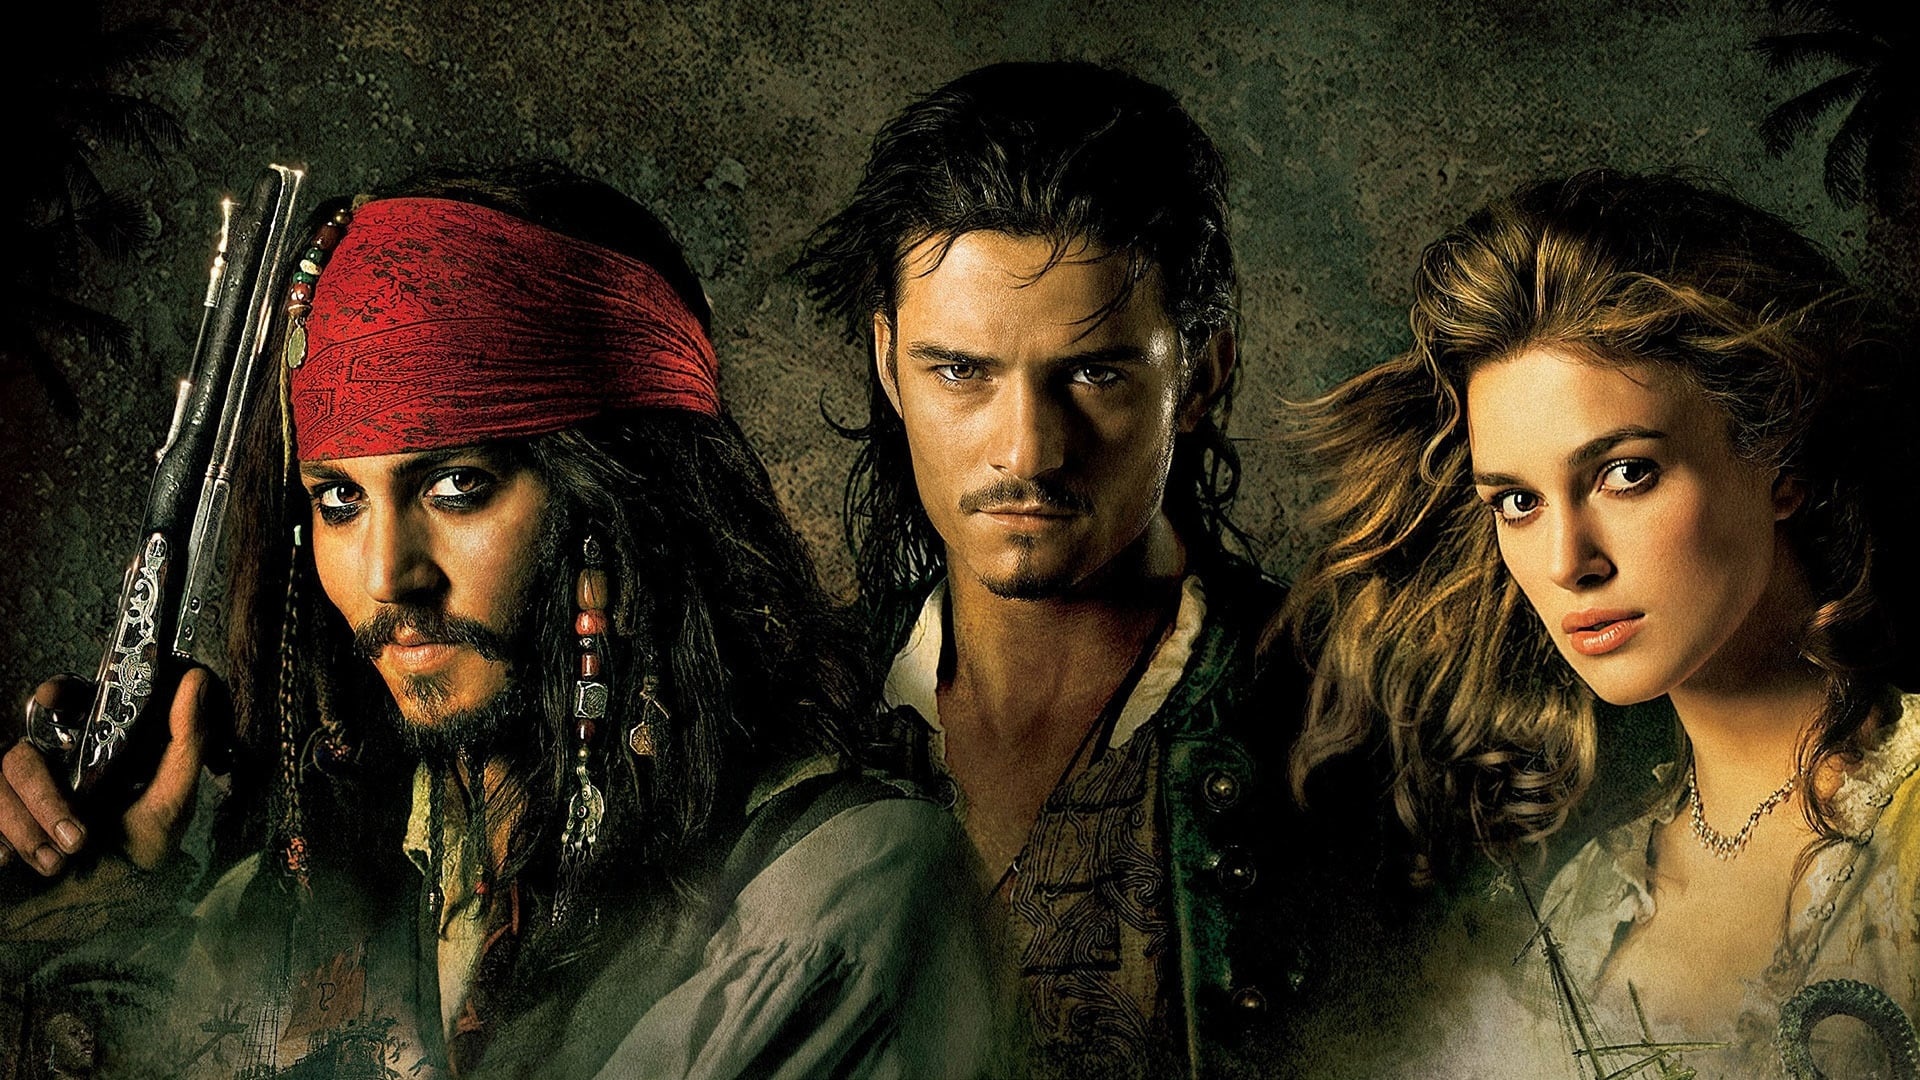 Pirates of the Caribbean: Dead Men Tell No Tales, American swashbuckler fantasy film directed by Joachim Ronning and Espen Sandberg. 1920x1080 Full HD Wallpaper.